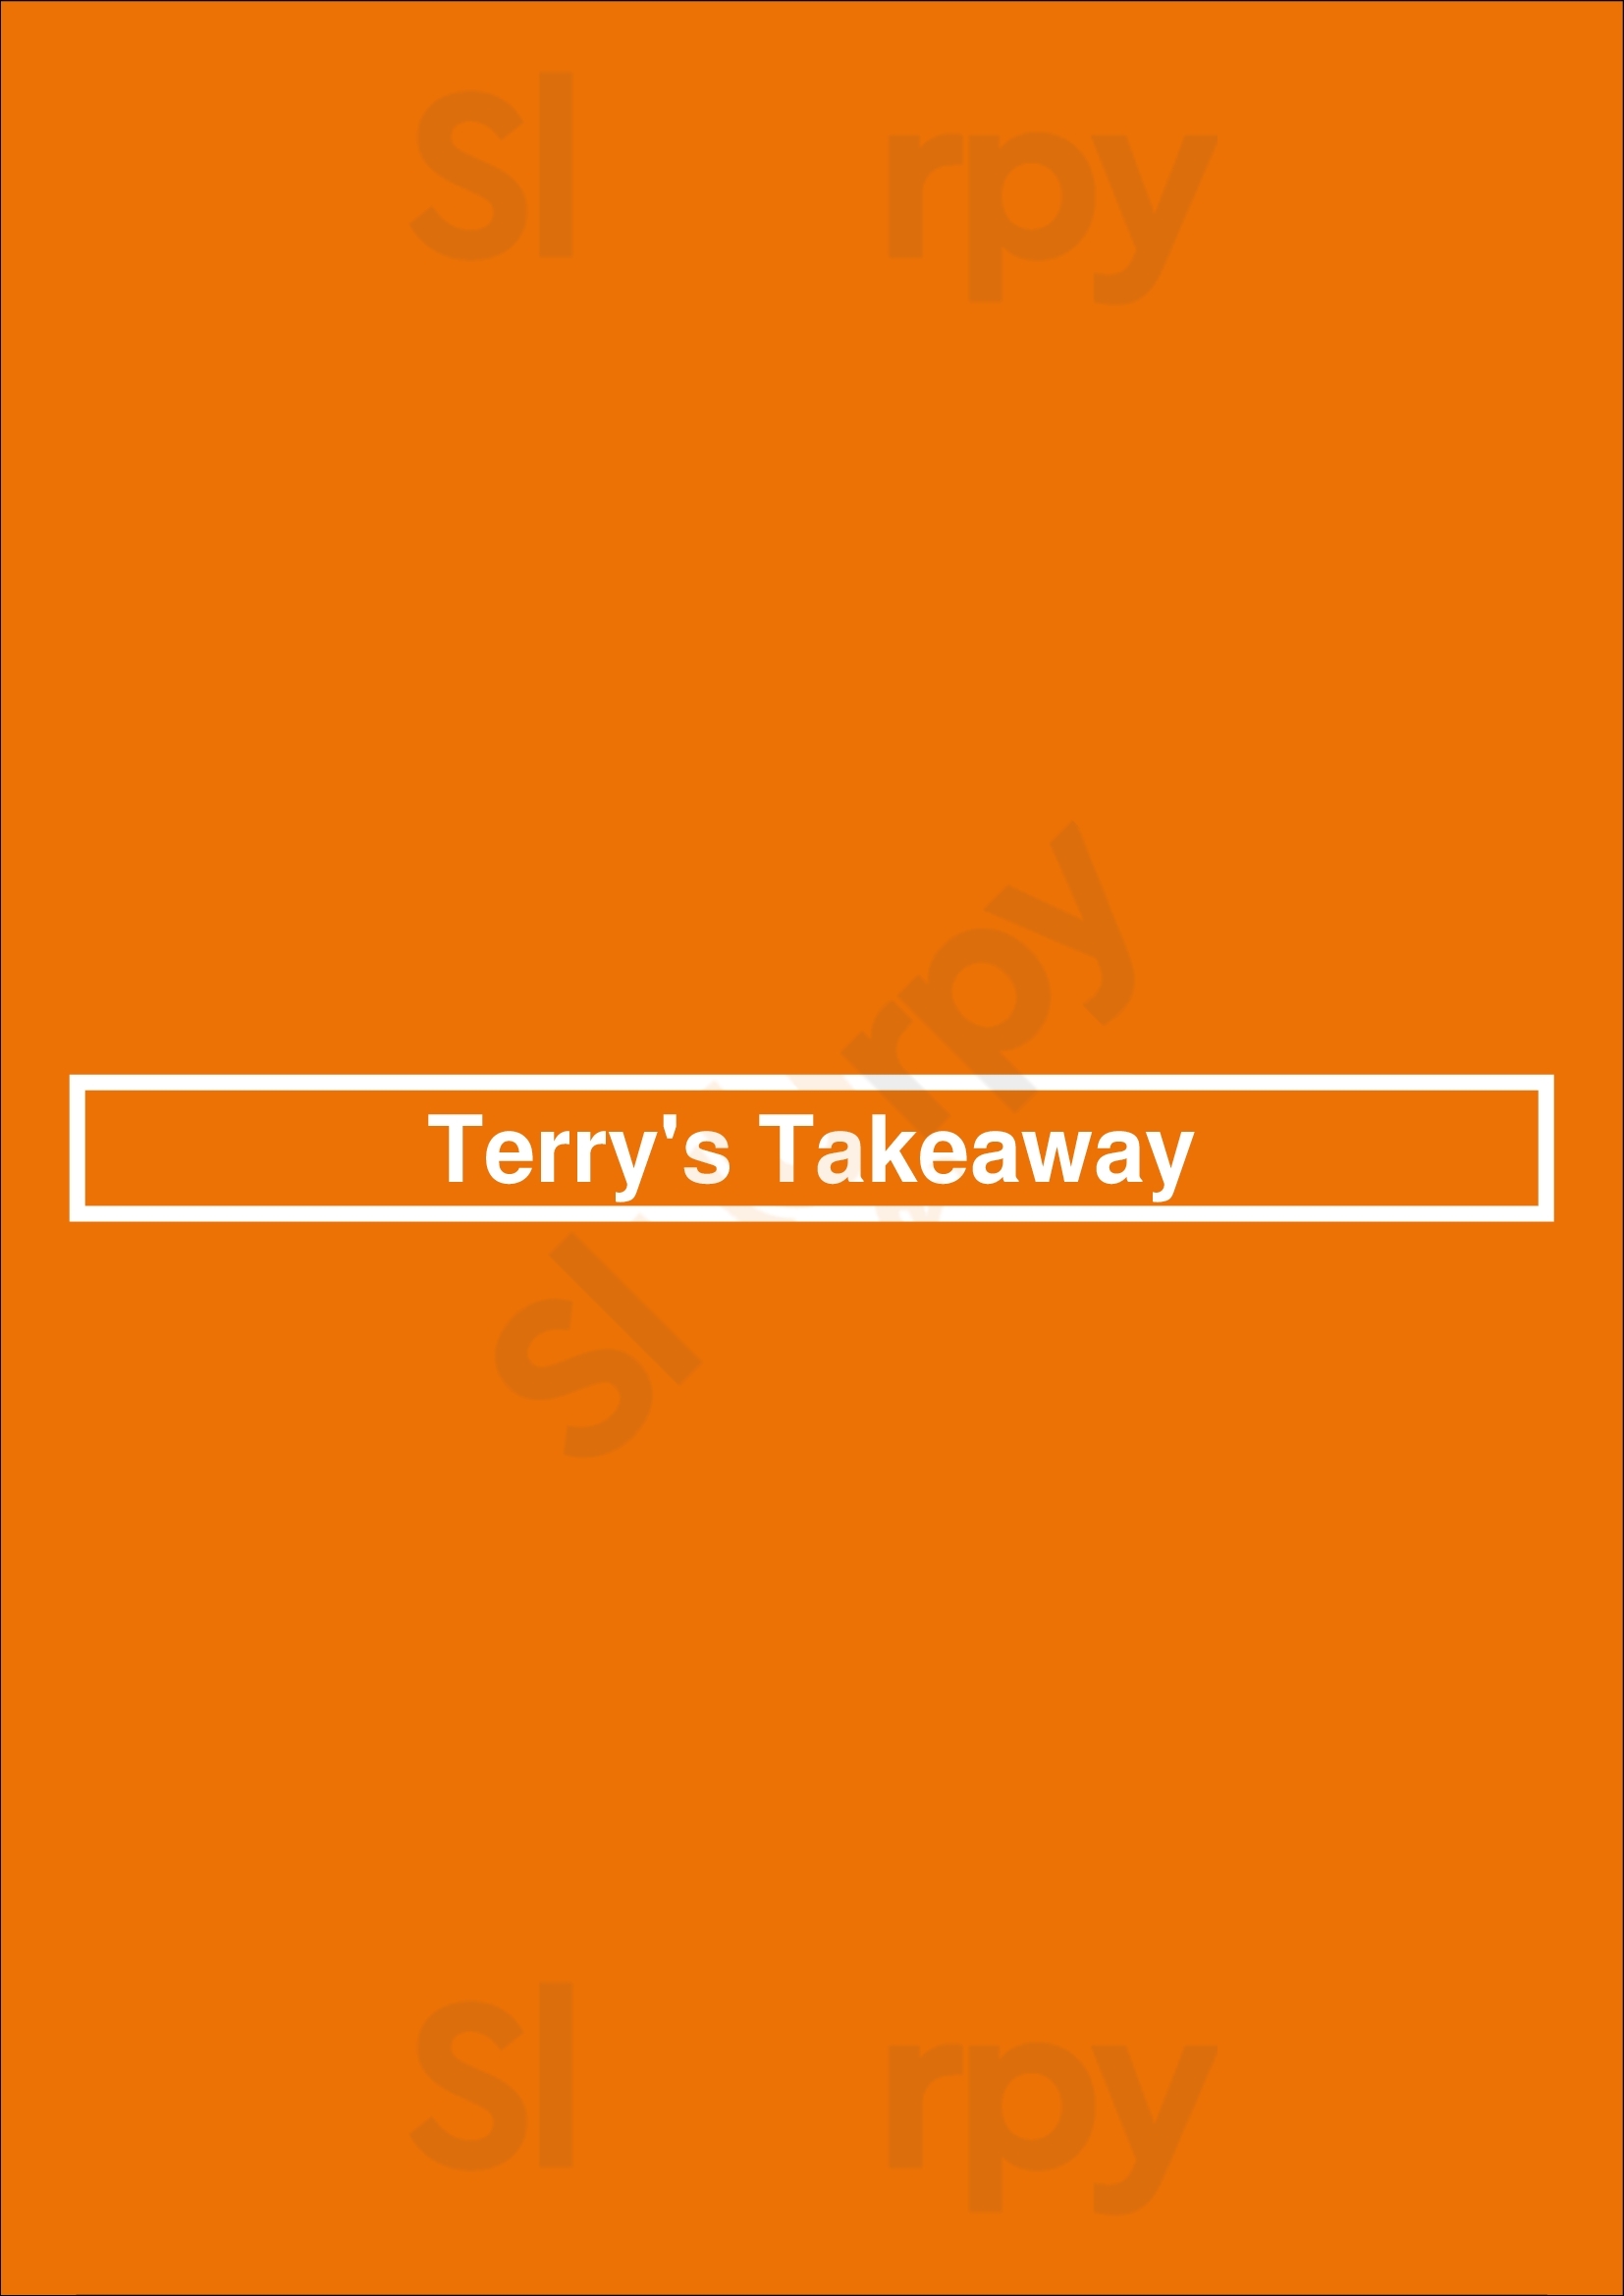 Terry's Takeaway Leicester Menu - 1